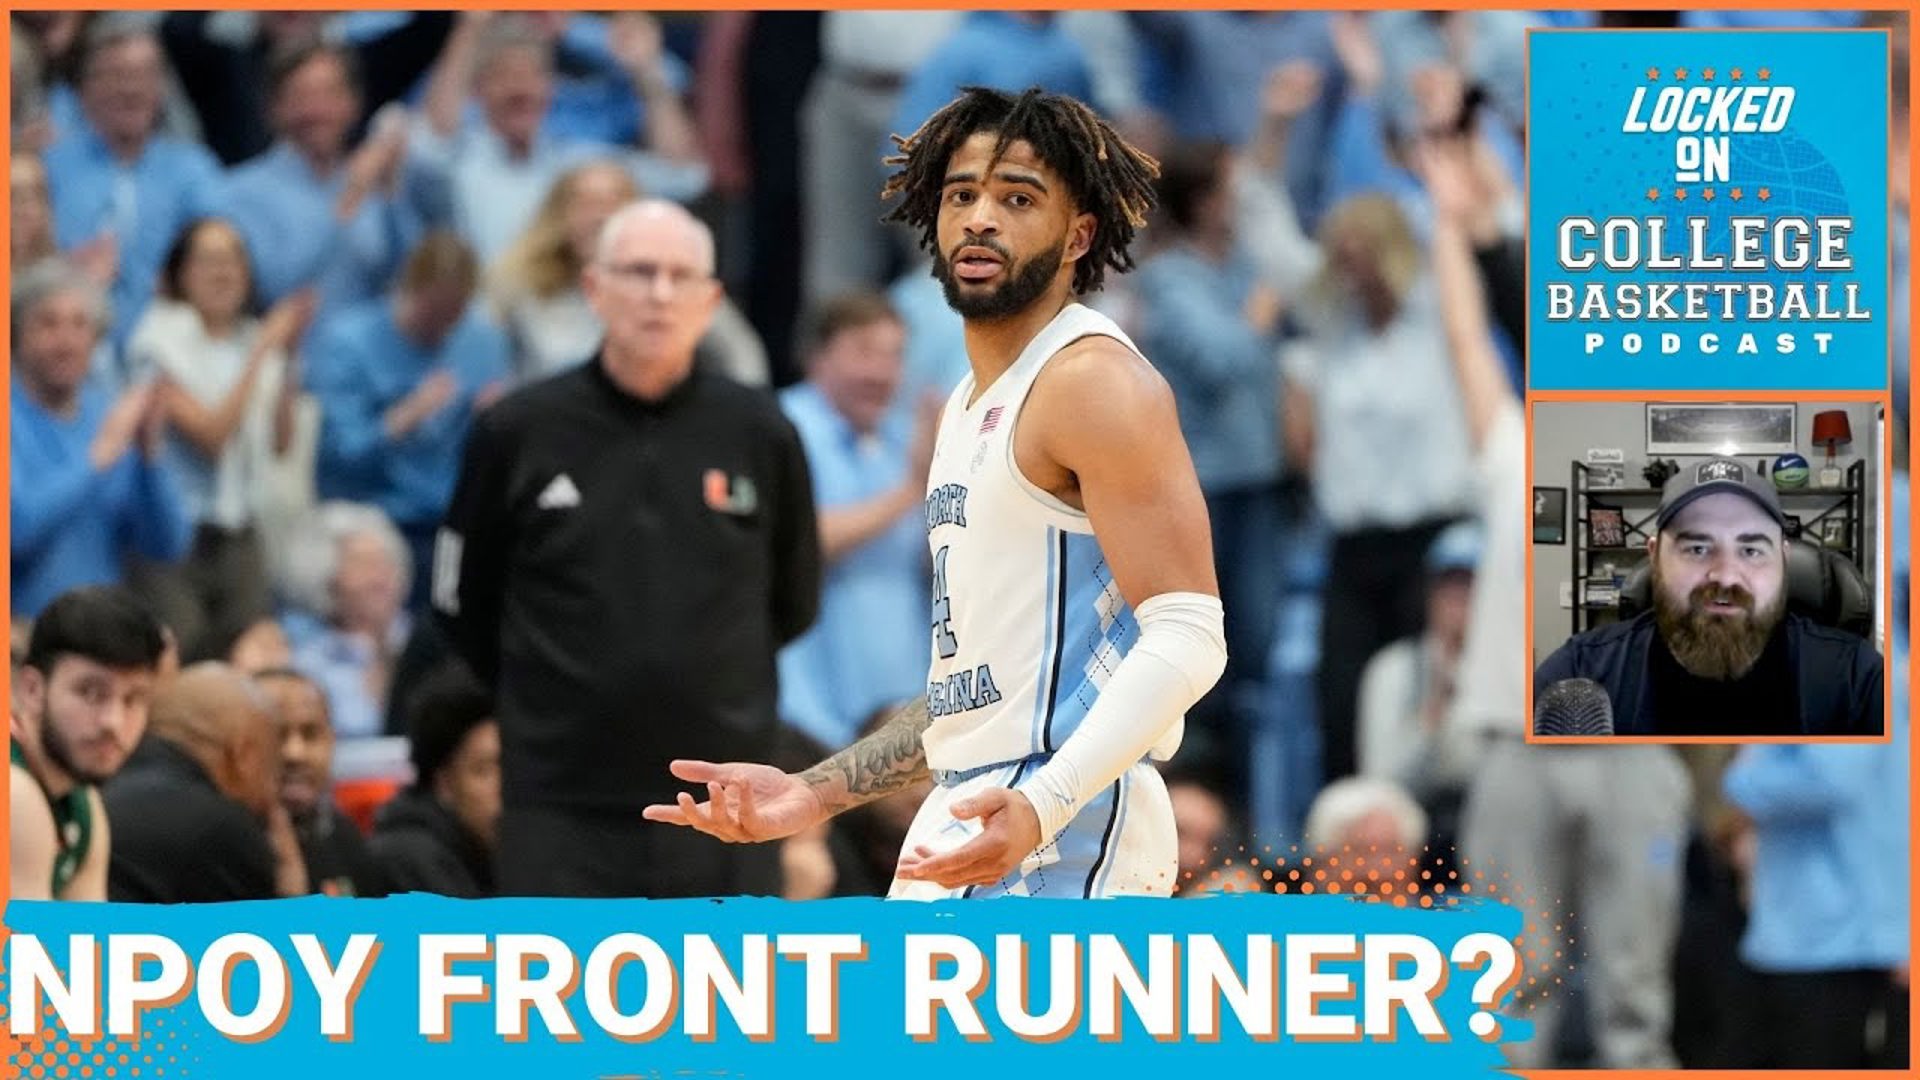 RJ Davis is reportedly set to return to Chapel Hill to play for Hubert Davis and the North Carolina Tar Heels for a fifth year, is he now the favorite to win POTY?